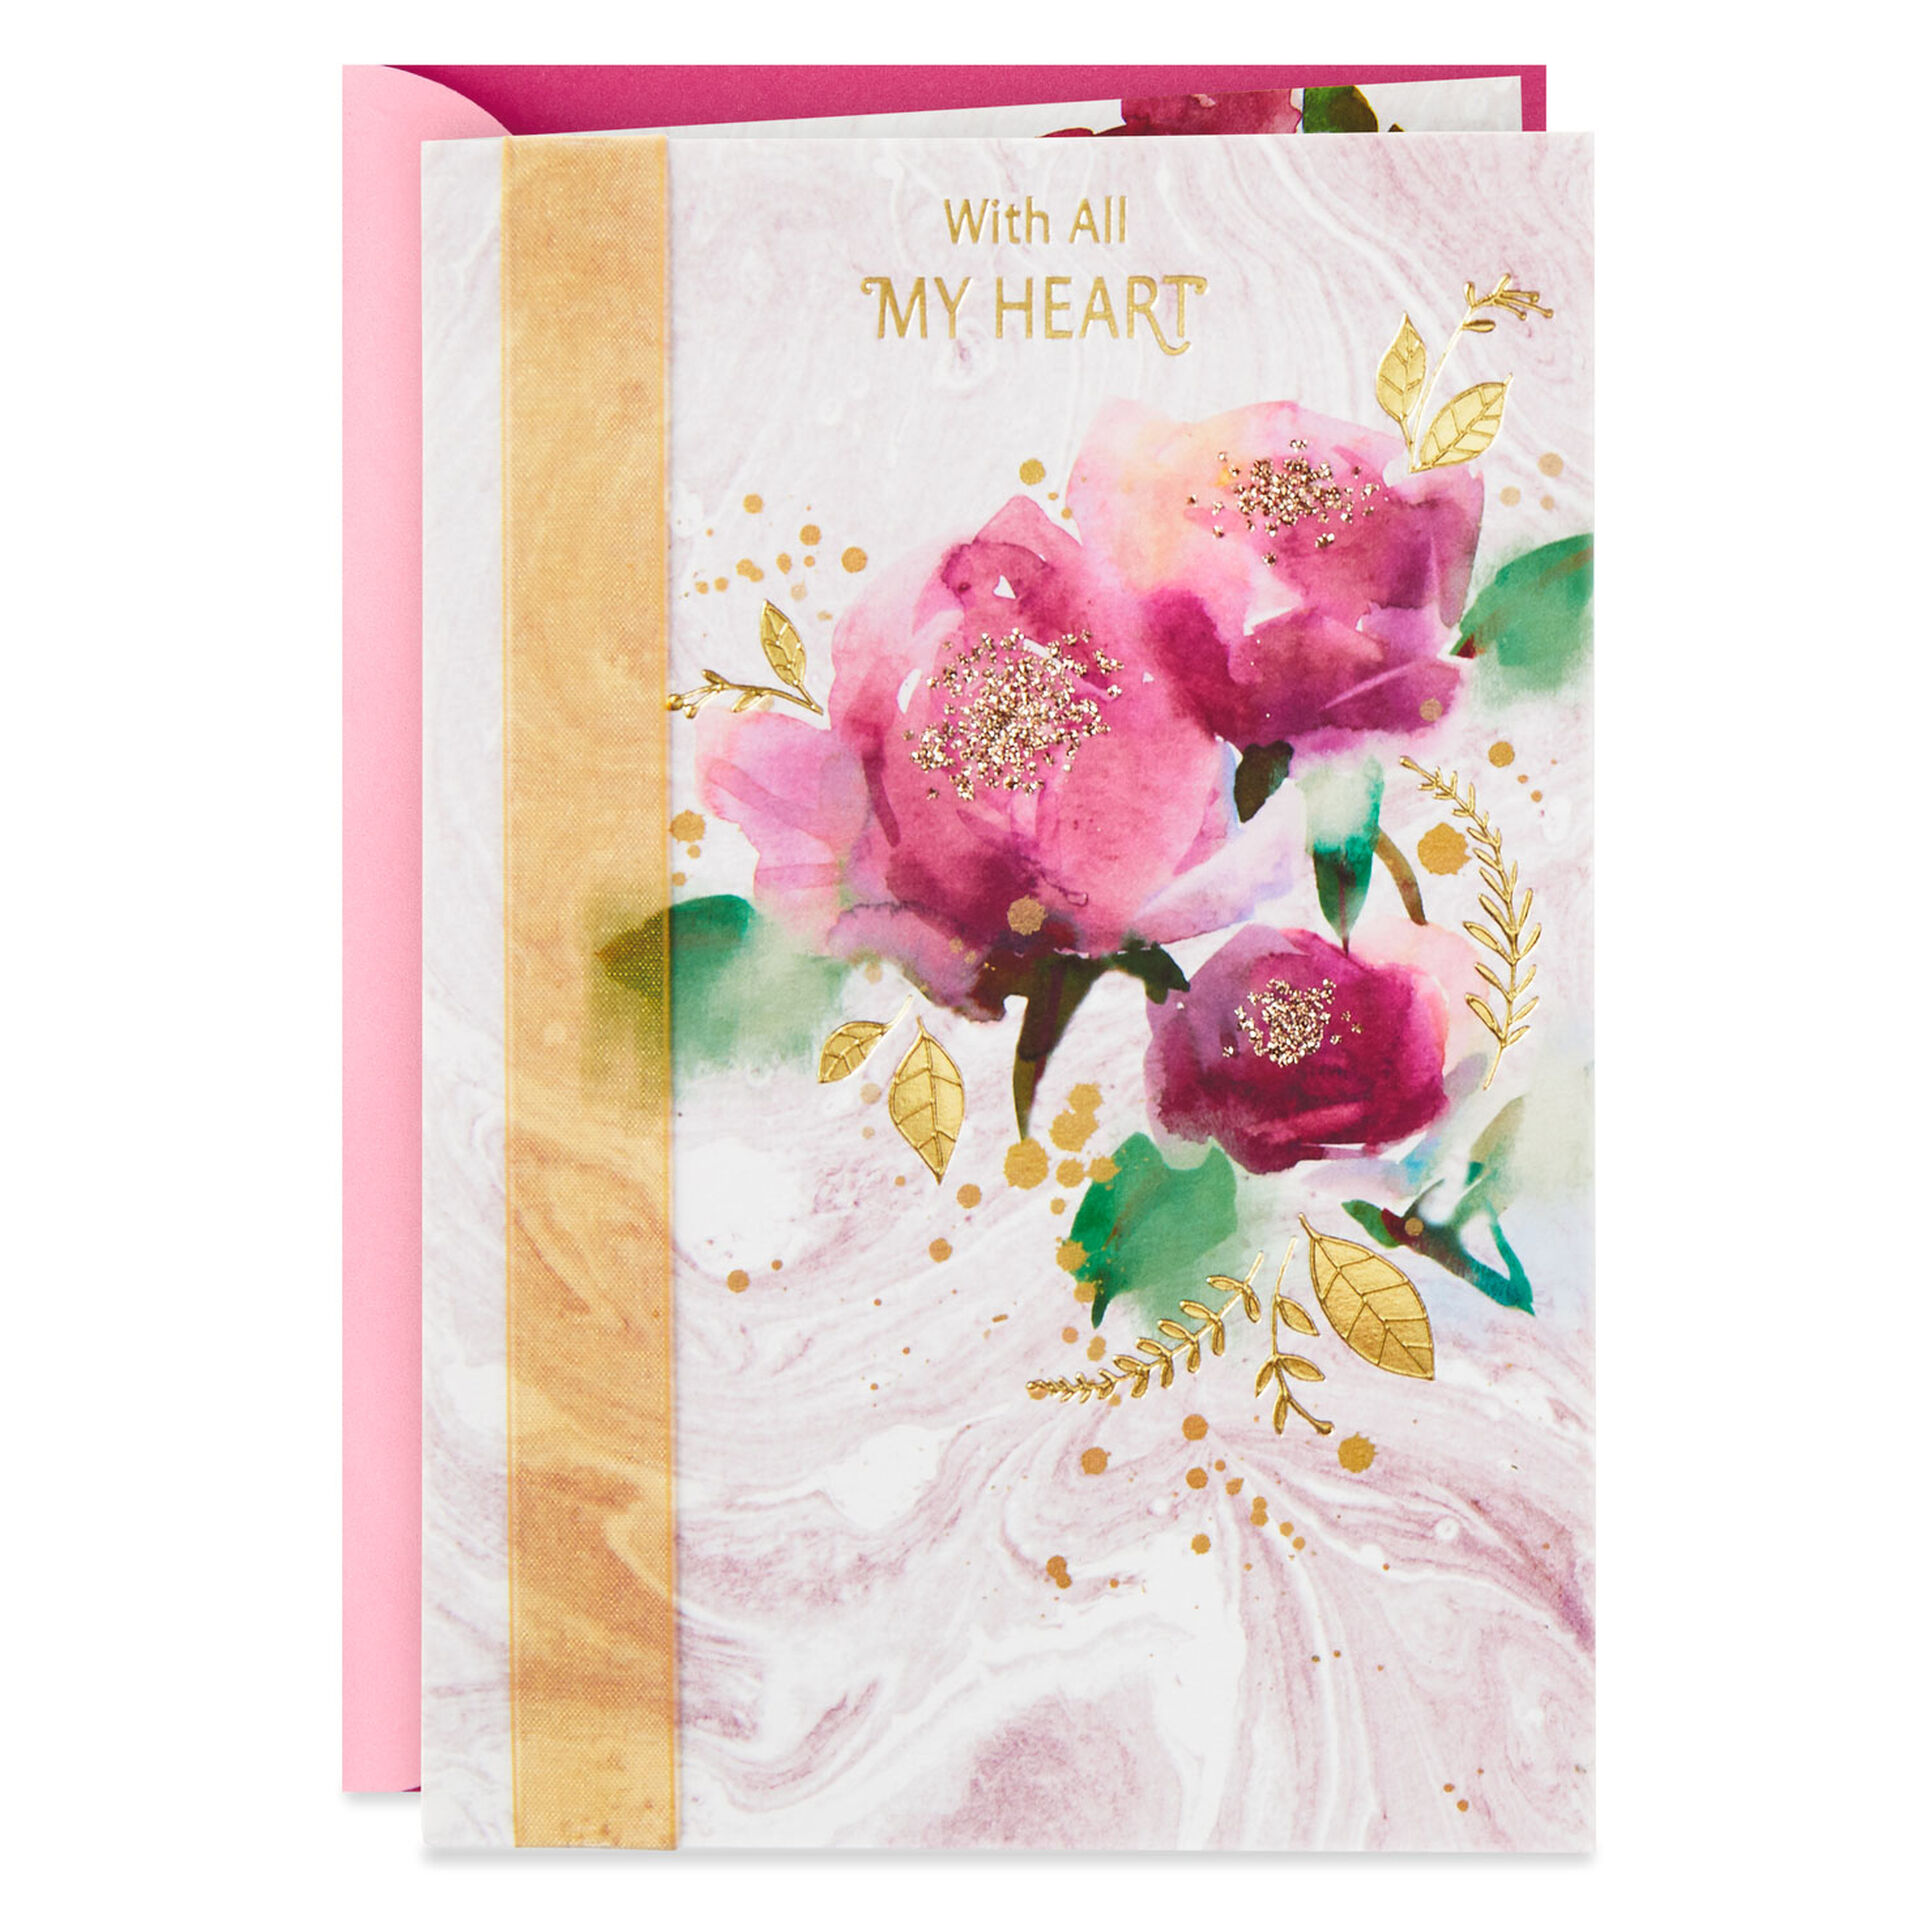 With-All-My-Heart-Romantic-Birthday-Card_499FBD3831_01